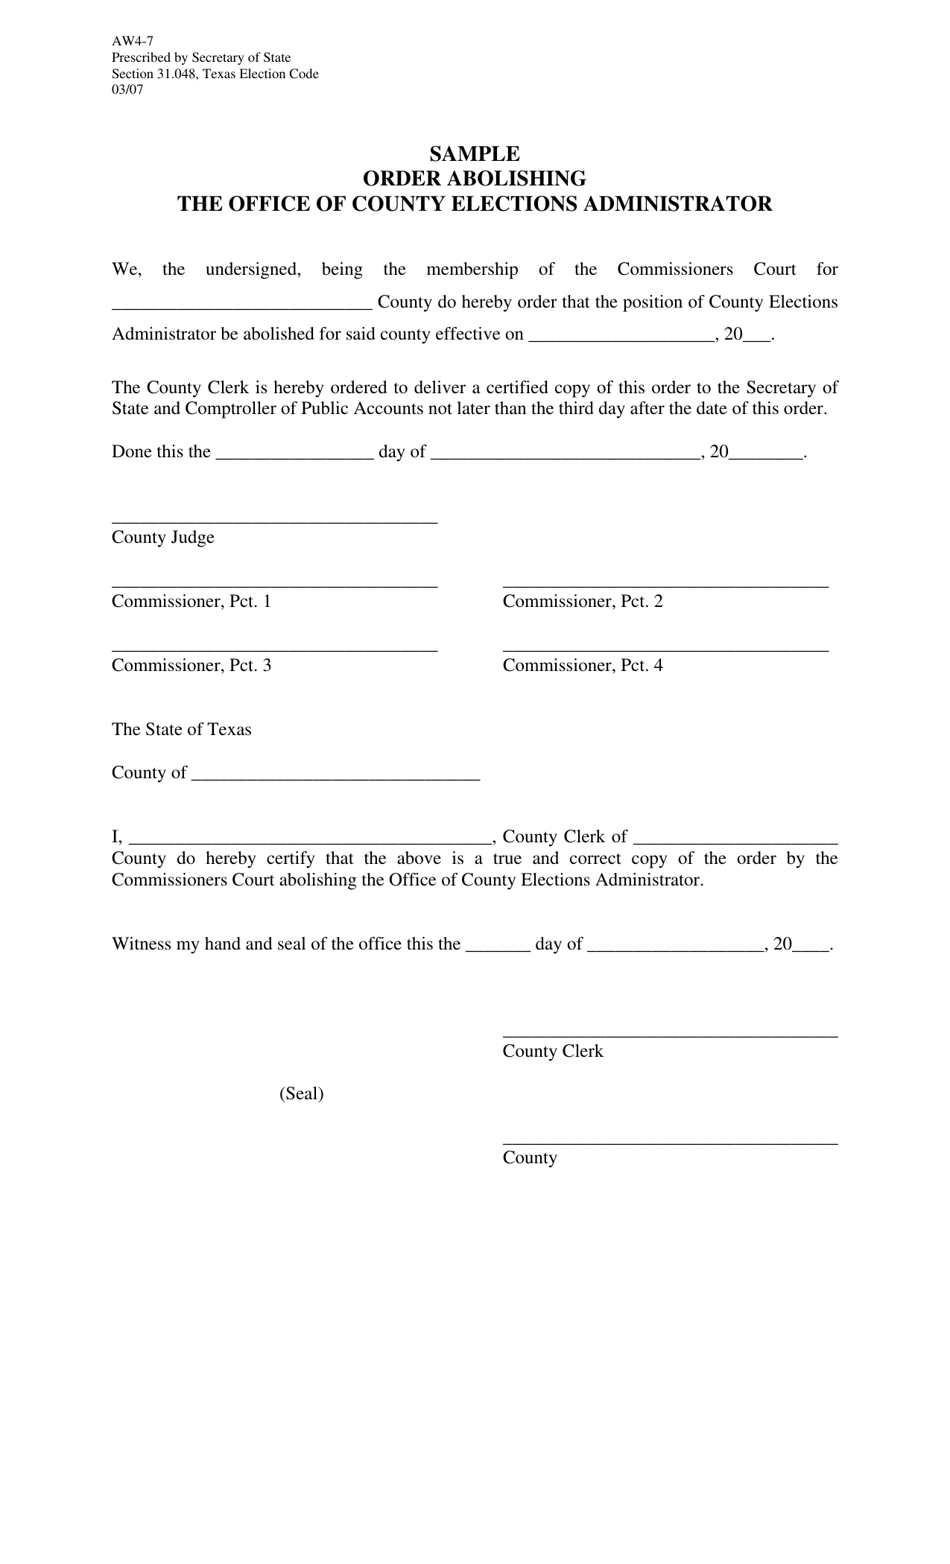 Form AW4-7 Order Abolishing the Office of County Elections Administrator - Texas, Page 1